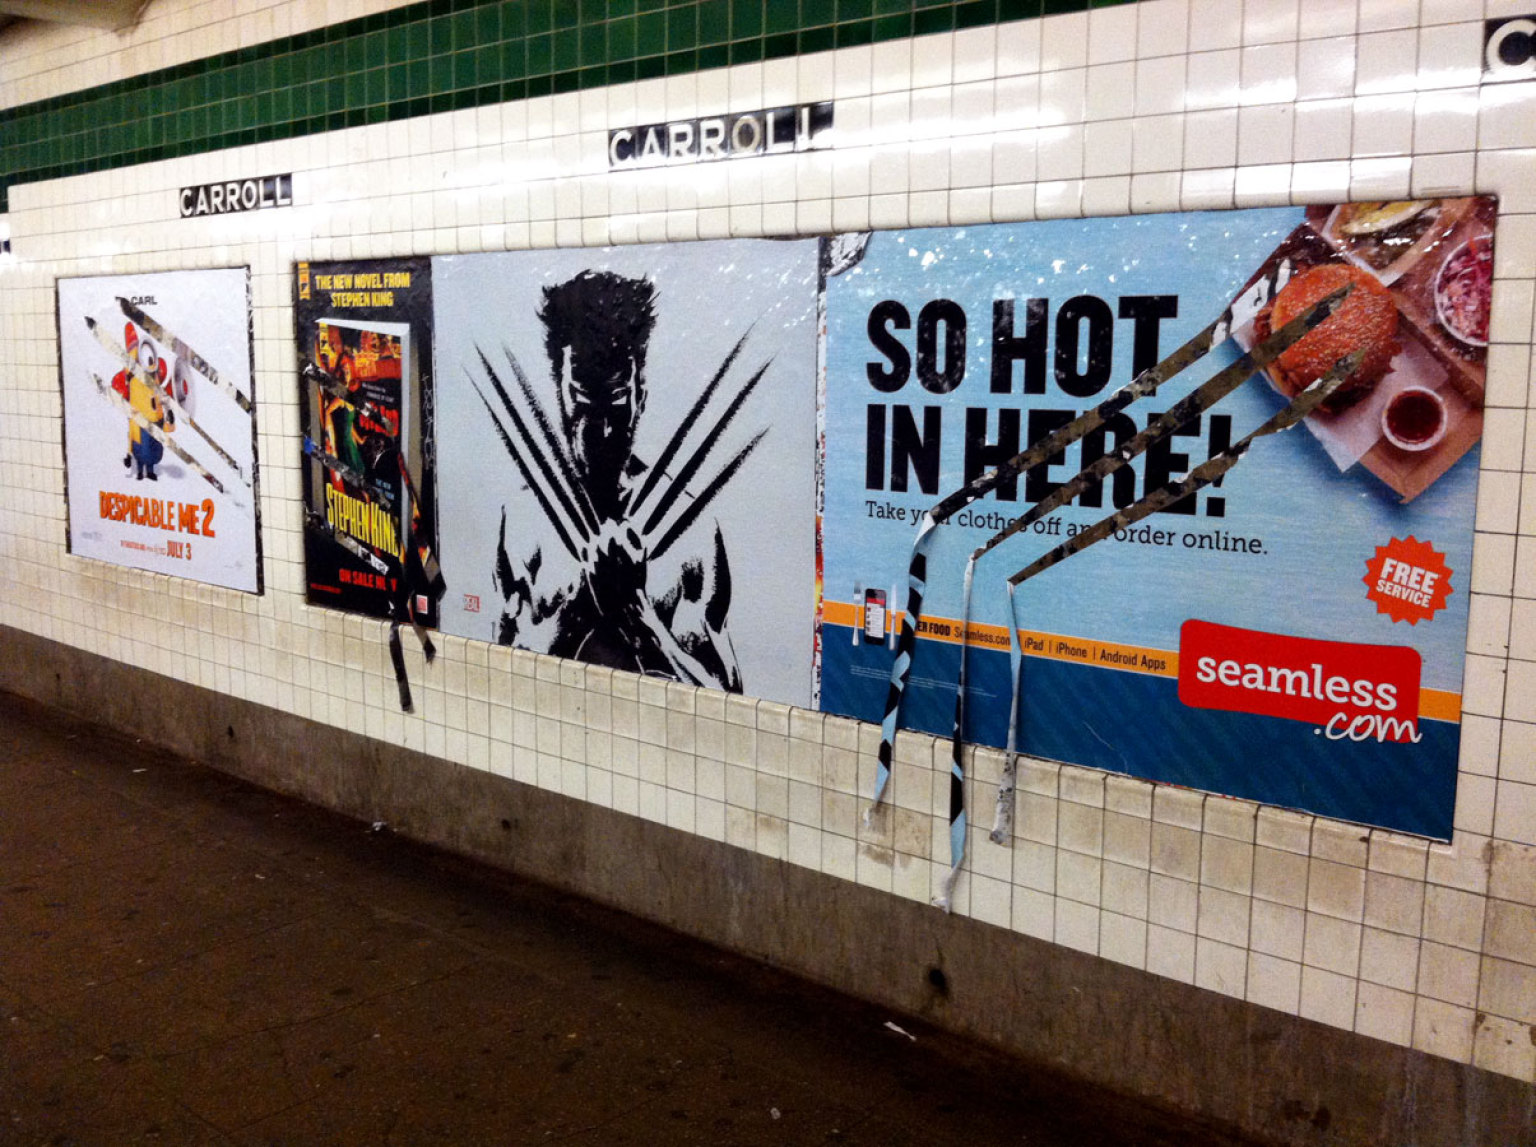 Vandal's Wolverine-Style Attack On Subway Posters (PICTURE)